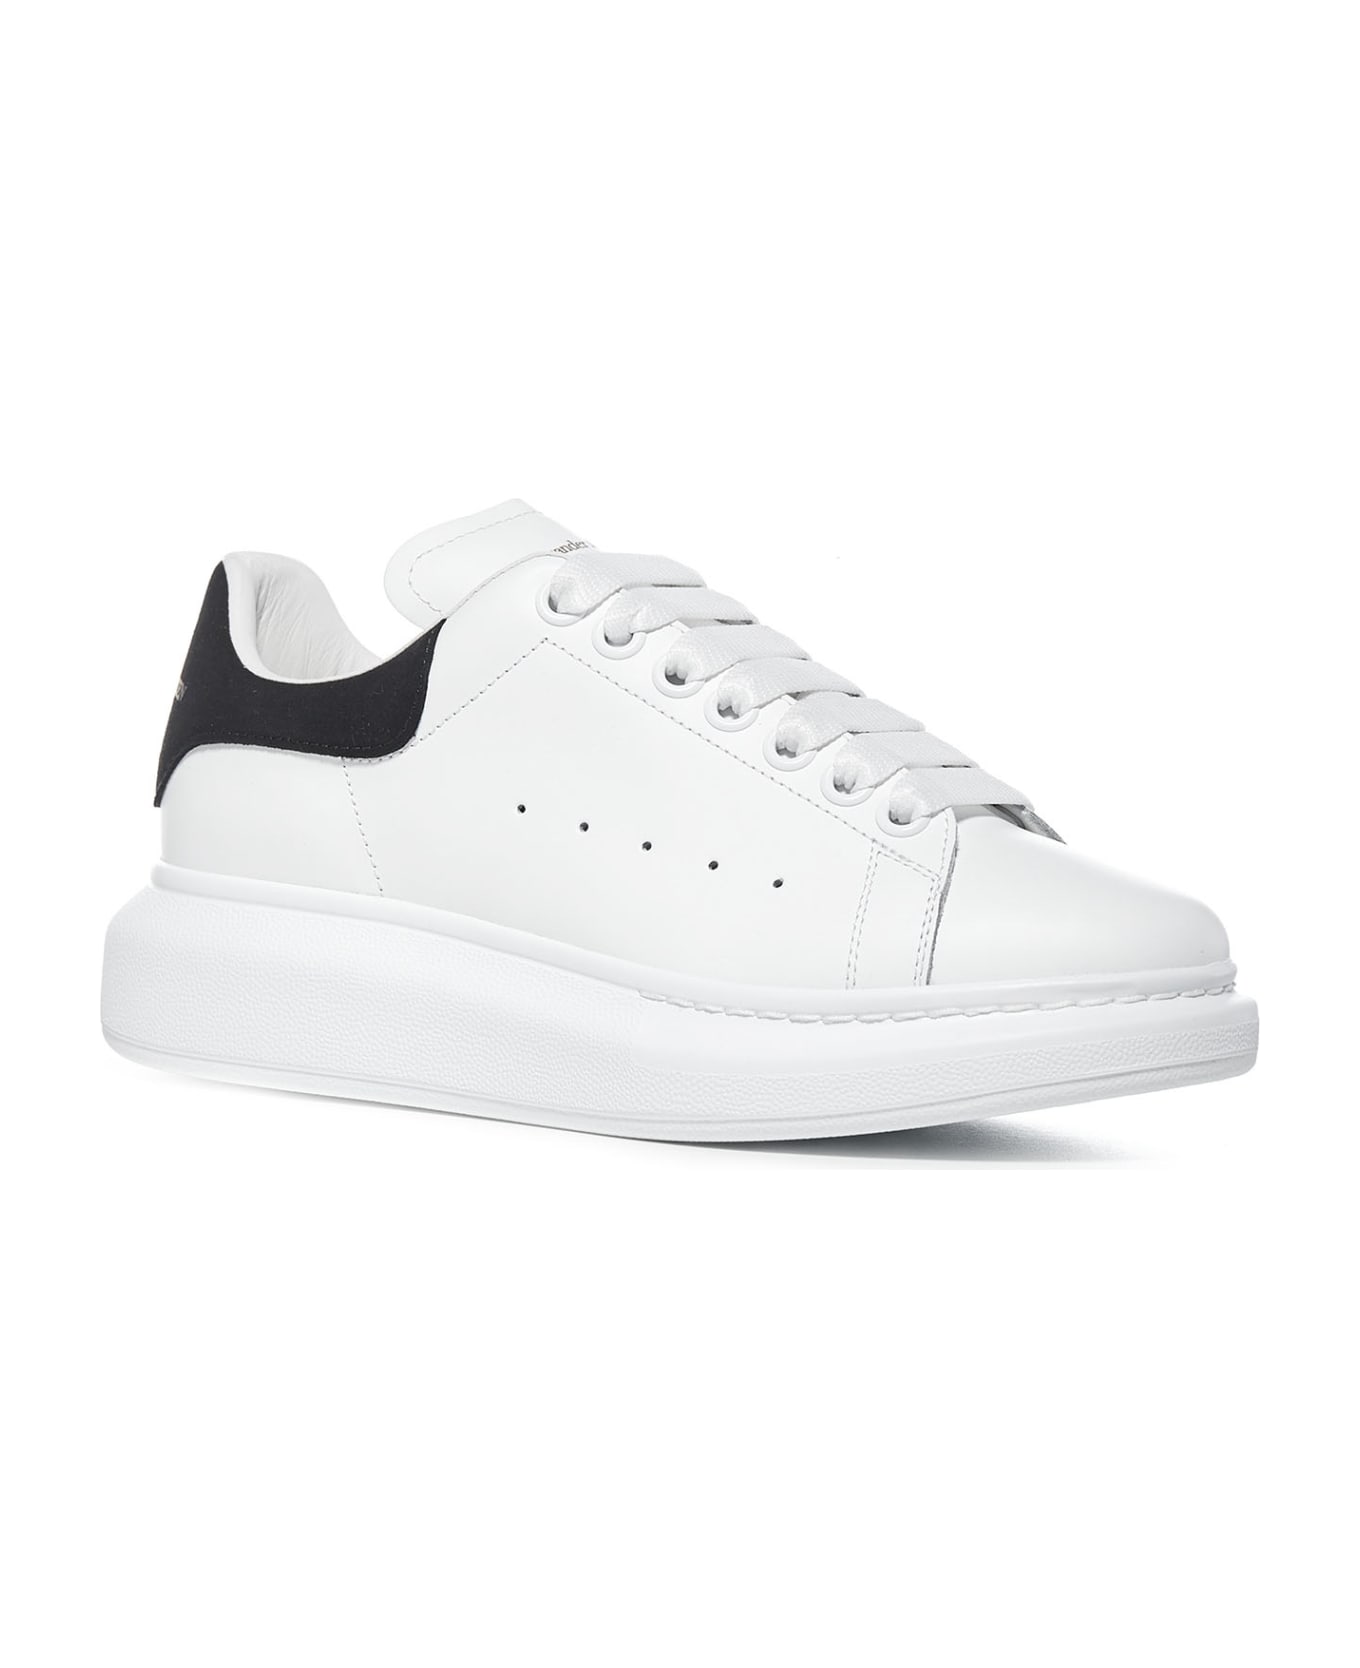 Alexander McQueen Oversized Sneakers In Leather With Contrasting Heel Tab - White Black スニーカー